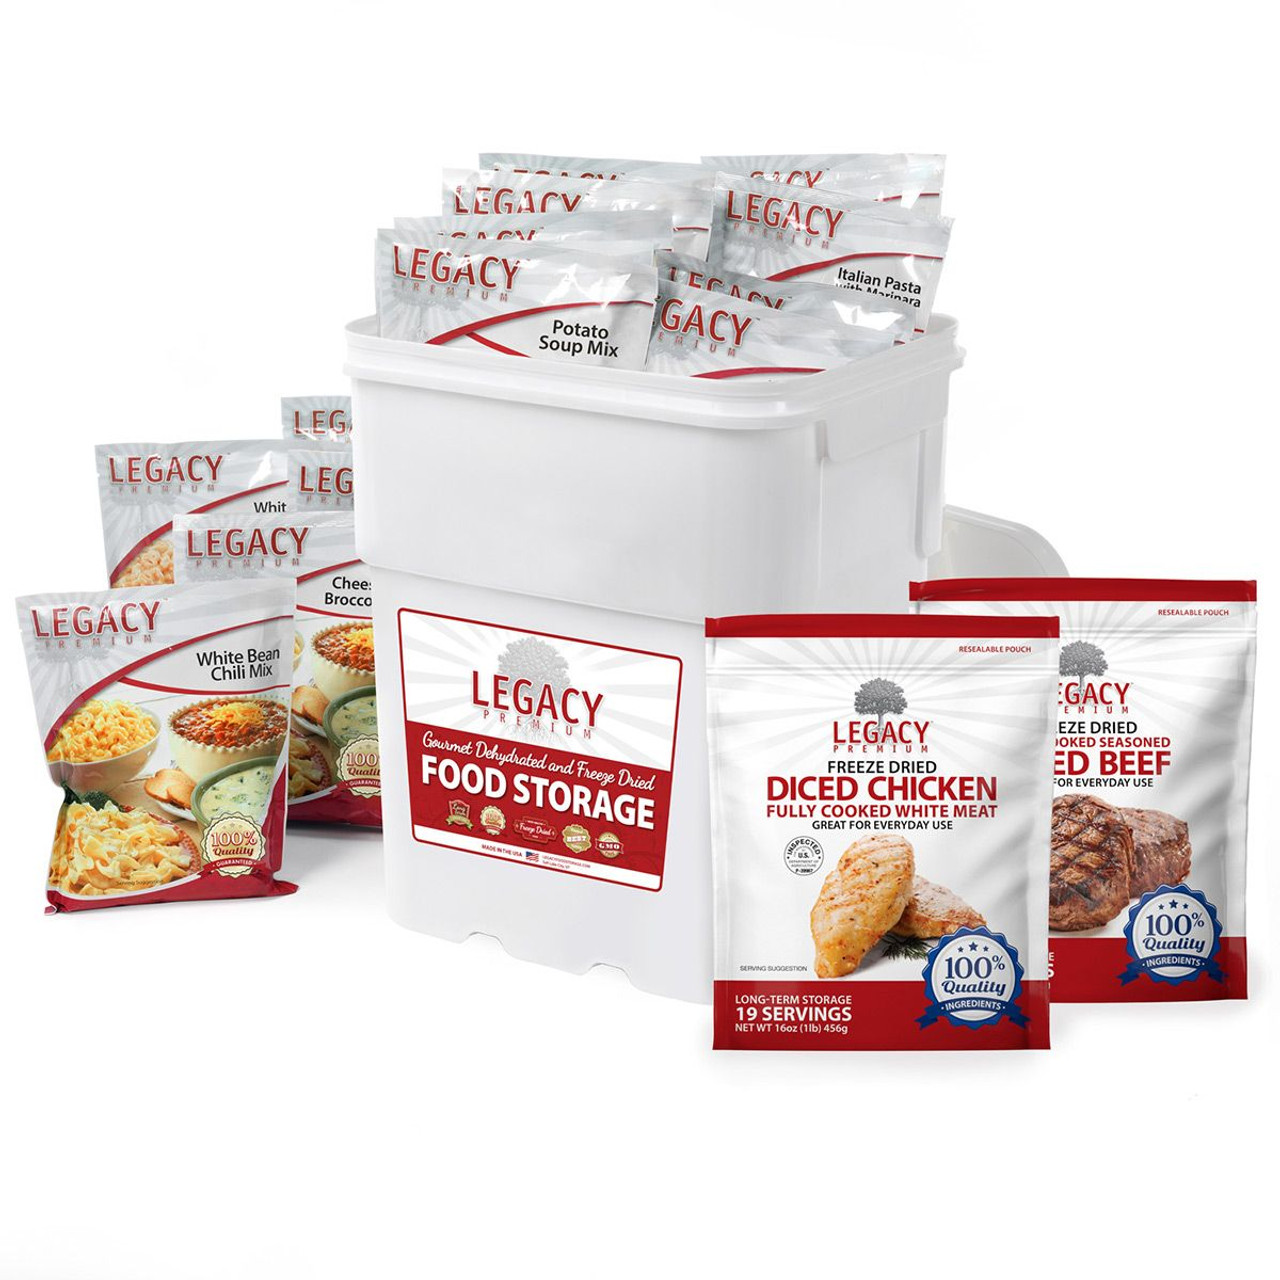 https://cdn11.bigcommerce.com/s-tumf4kk1l4/images/stencil/1280x1280/products/3665/6661/legacy-158-serving-entr-e-meat-combo-bucket-with-freeze-dried-beef-chicken-29__44872.1640716769.jpg?c=1?imbypass=on